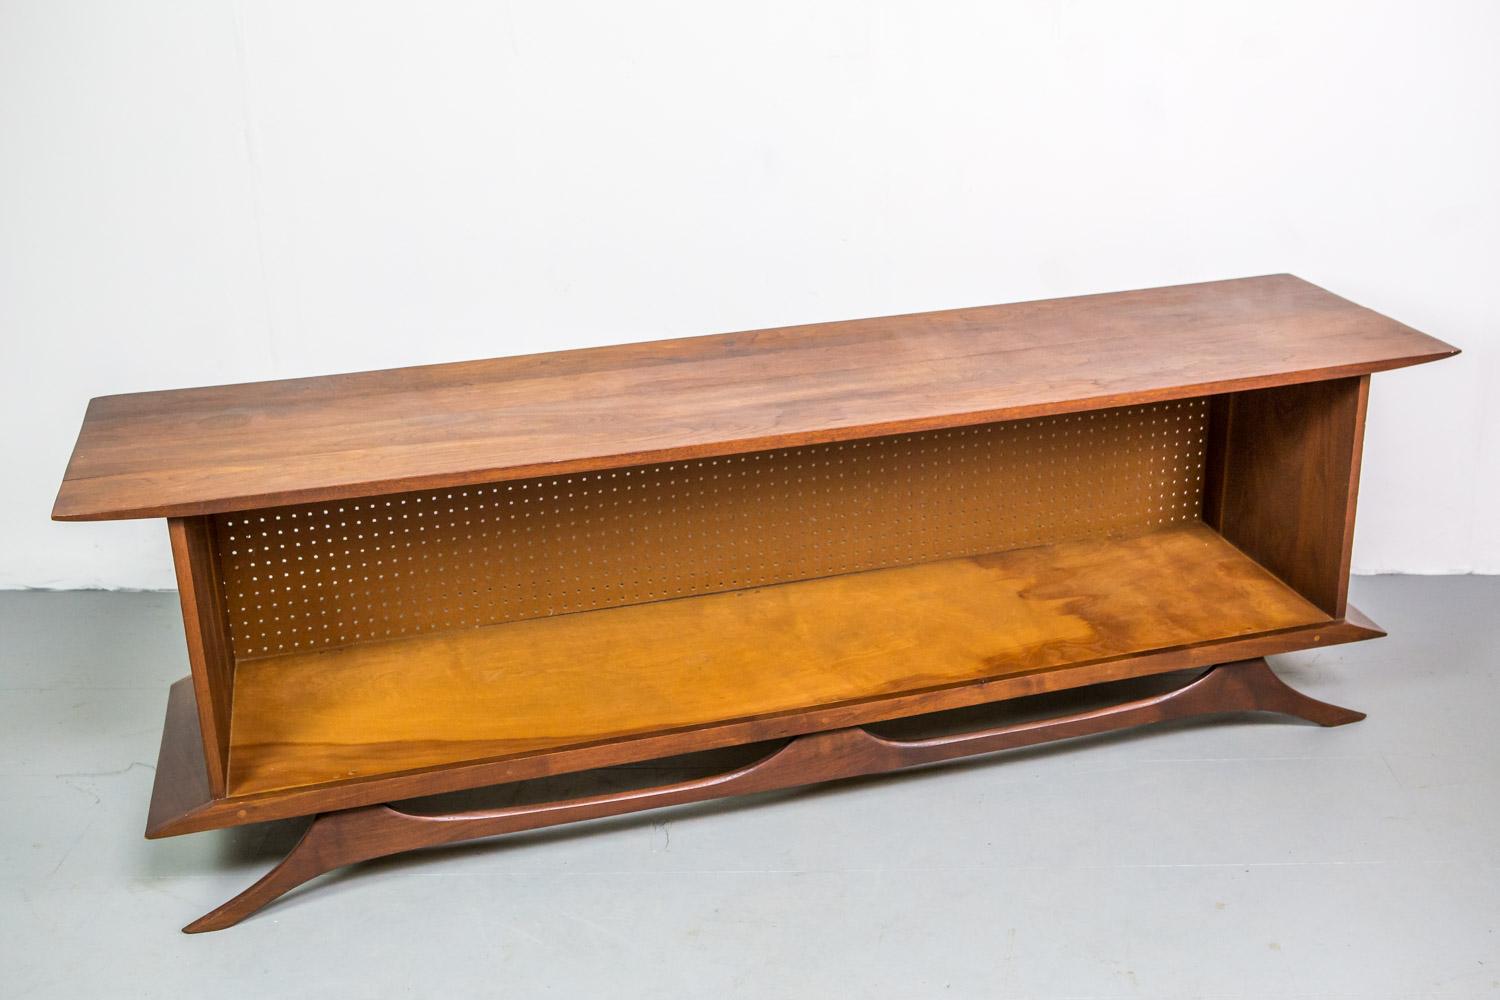 Sculpted studio cabinet, credenza or sideboard in walnut.
This crafted woodworking piece has a Japanese esthetic.